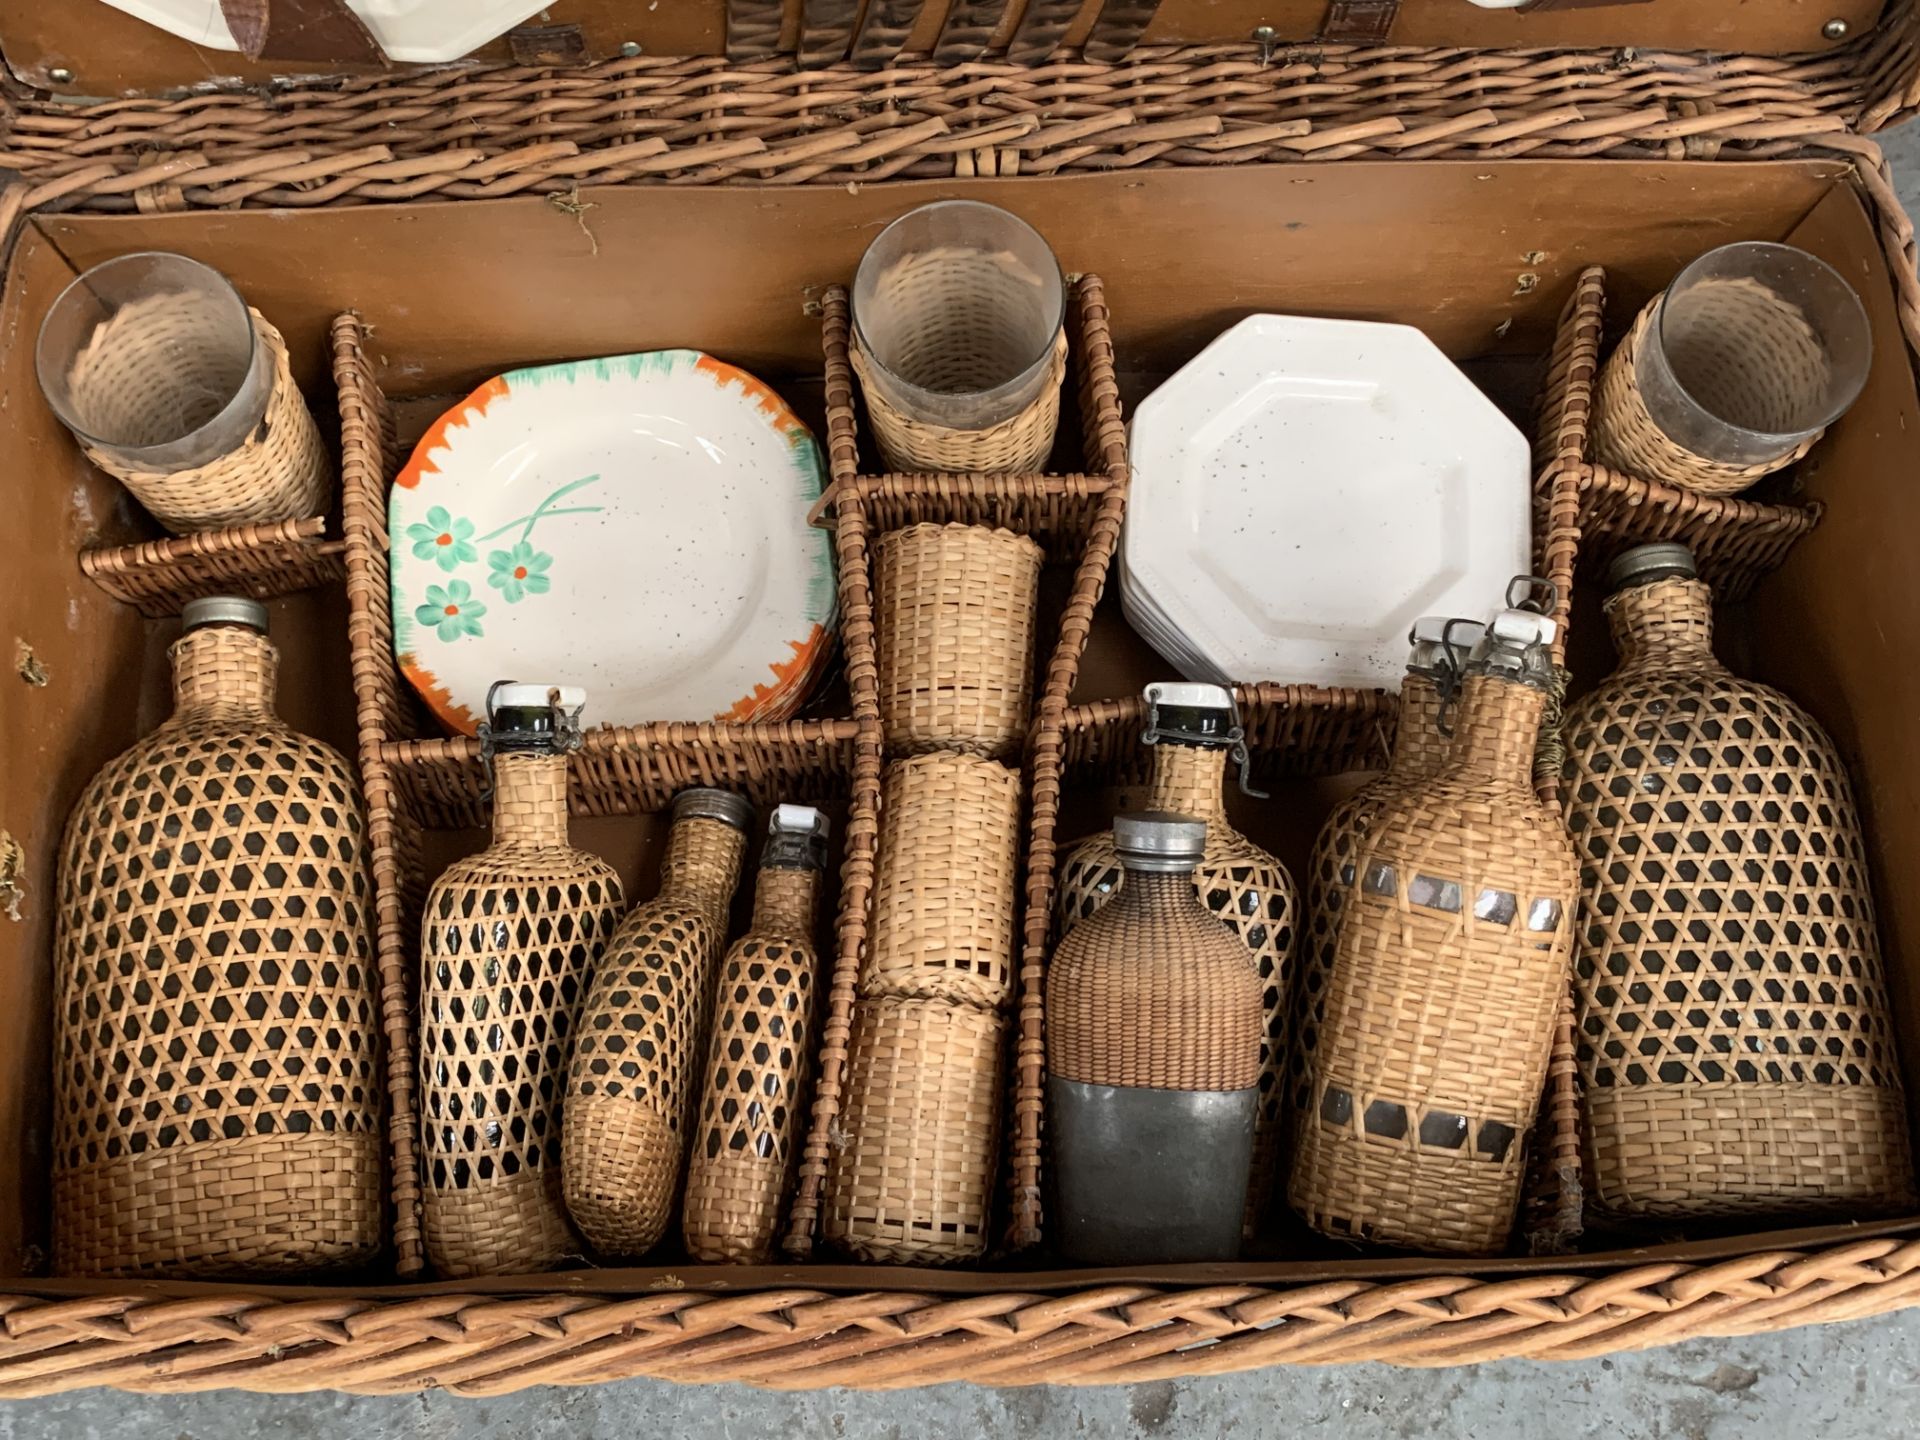 Vintage Wicker Picnic Basket with Contents - Image 2 of 4